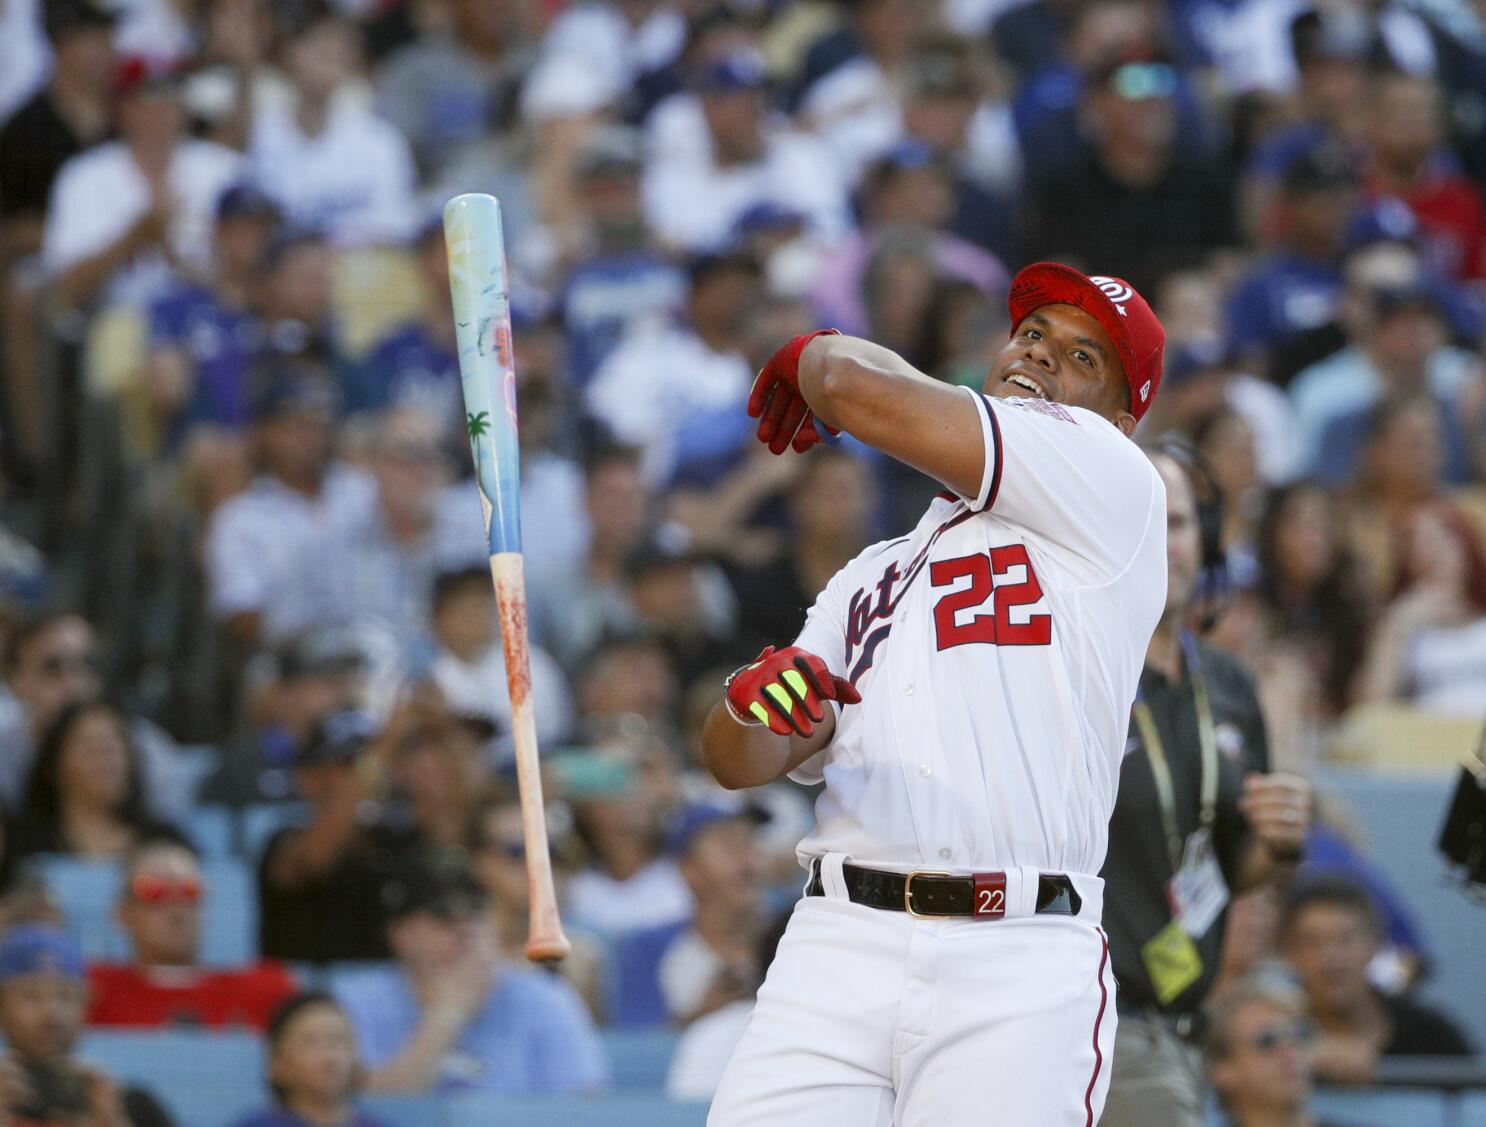 The Padres should not trade Juan Soto this offseason